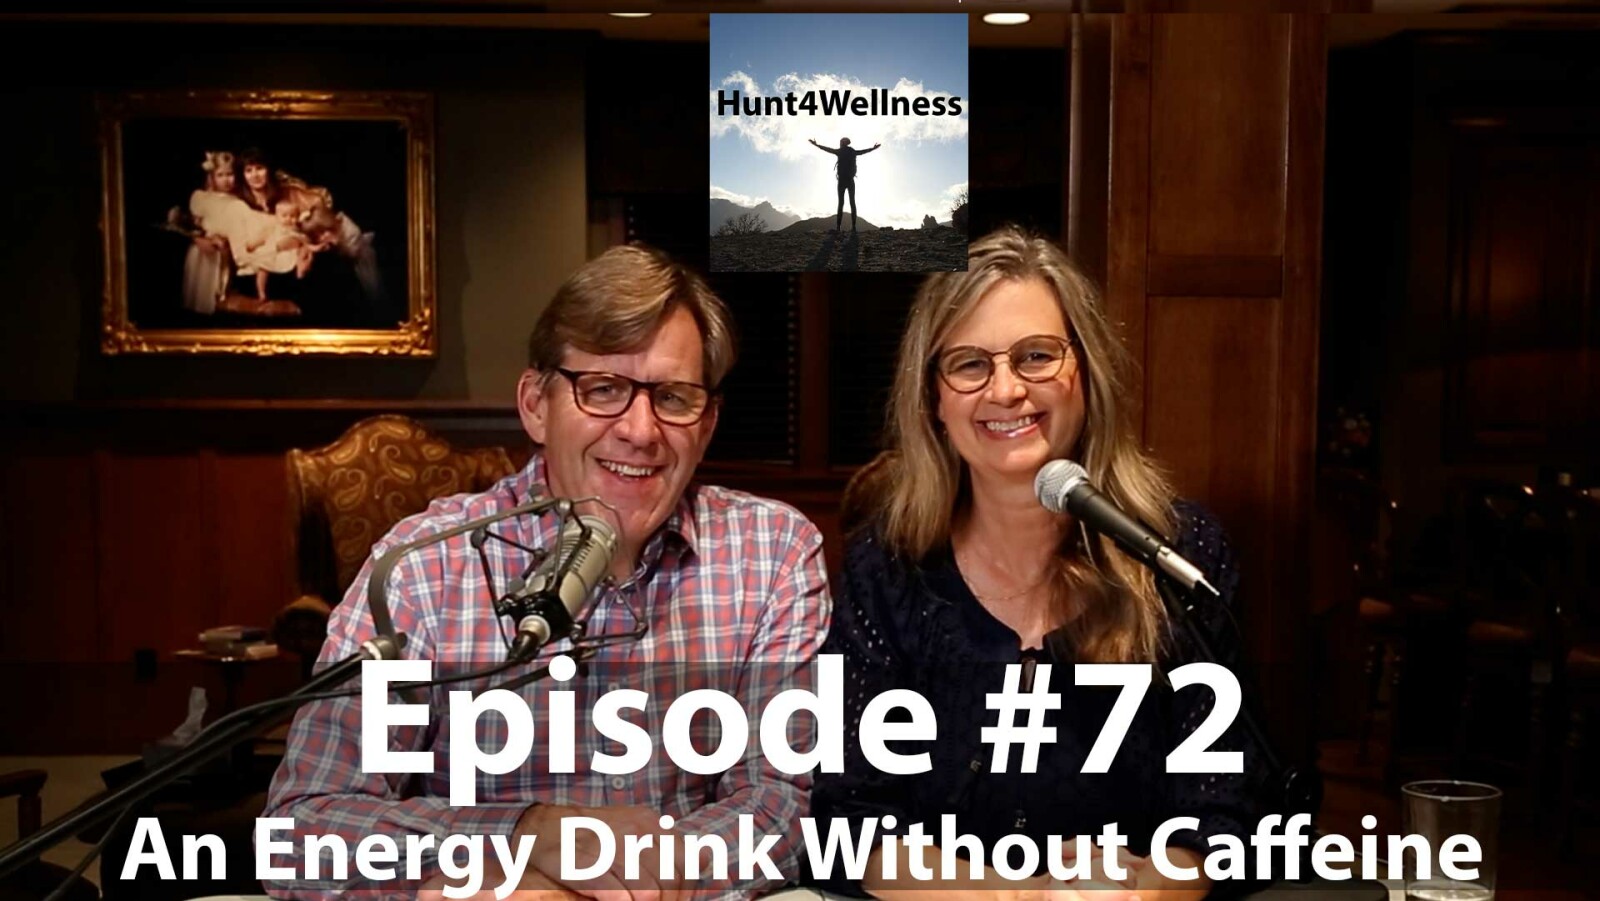 Episode #72 - An Energy Drink Without Caffeine